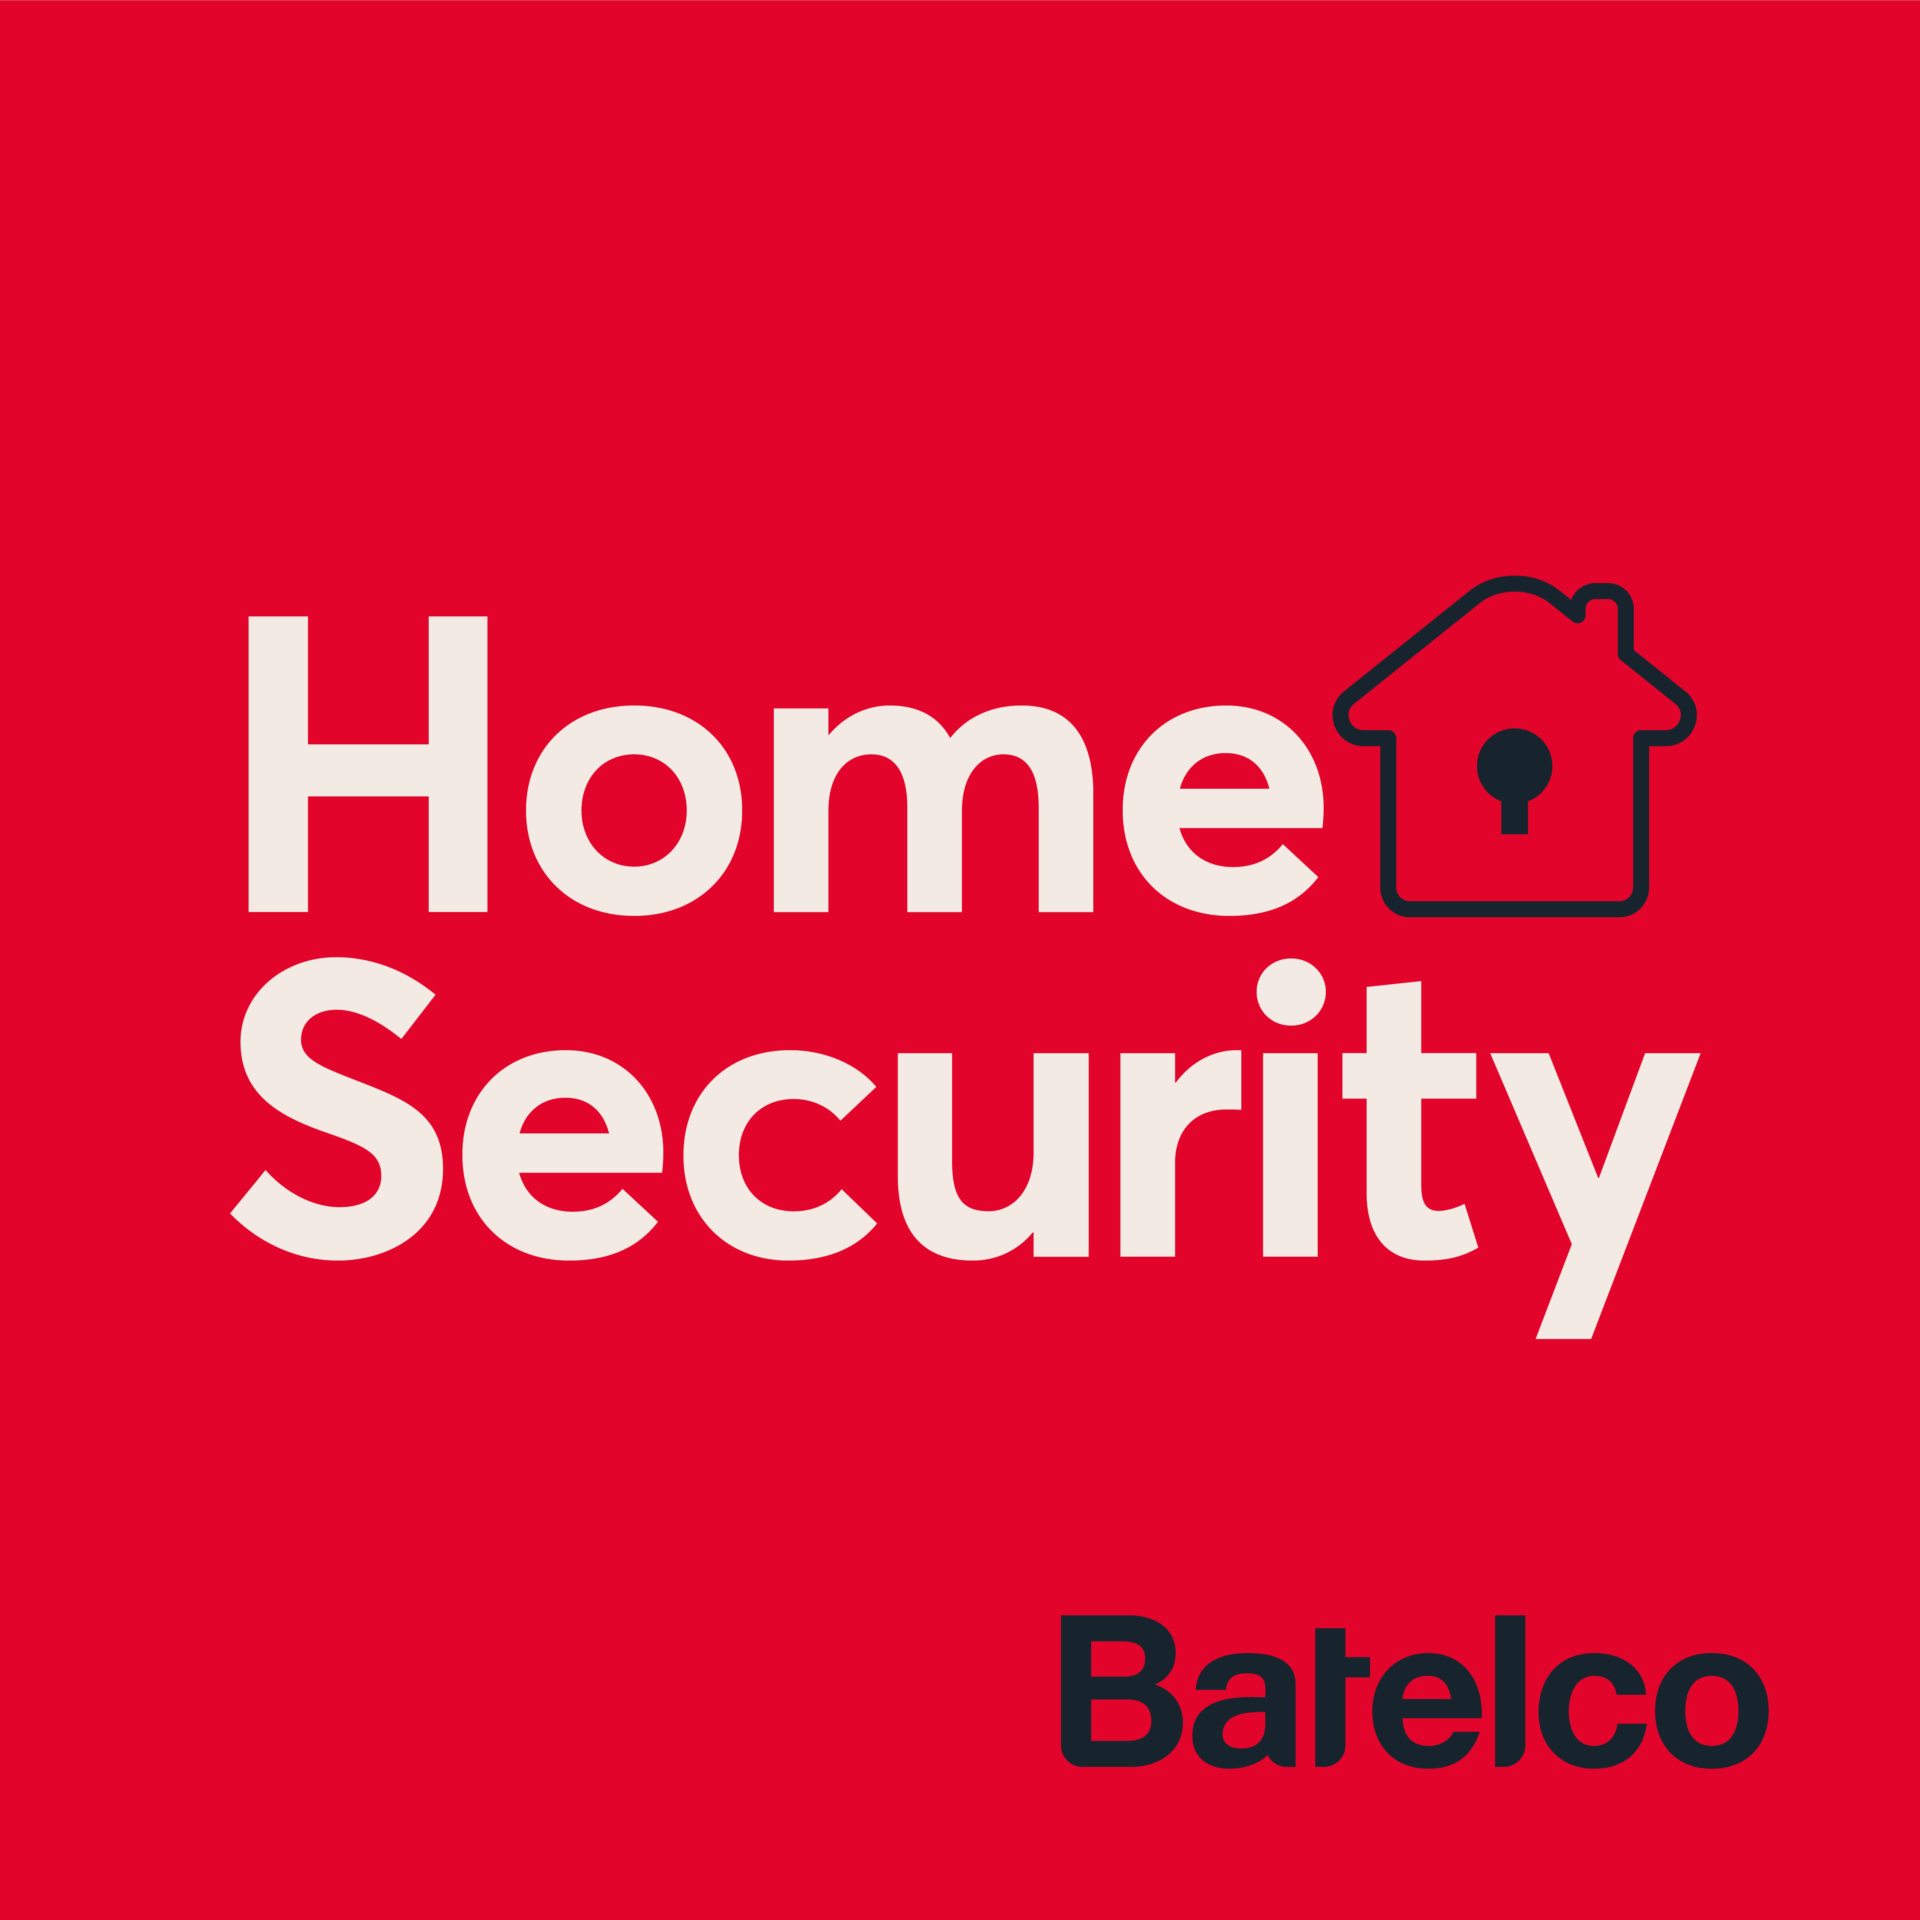 Home Security Batelco